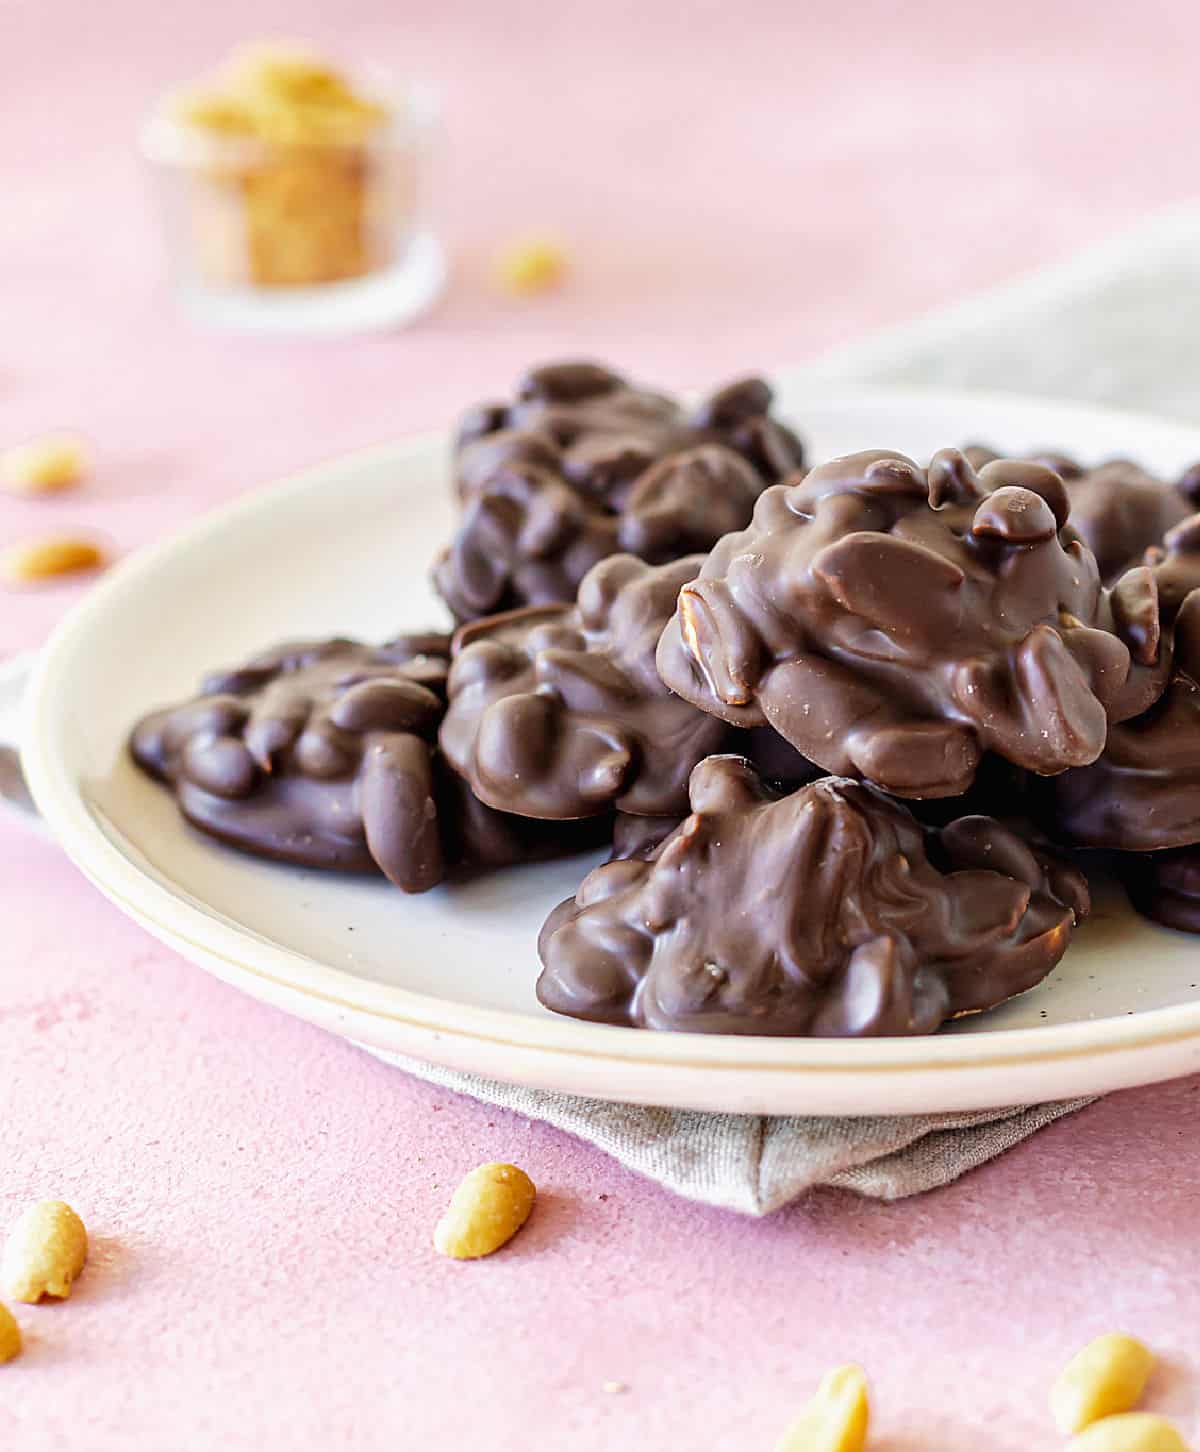 White plate with chocolate peanut clusters on pink surface, peanuts around.